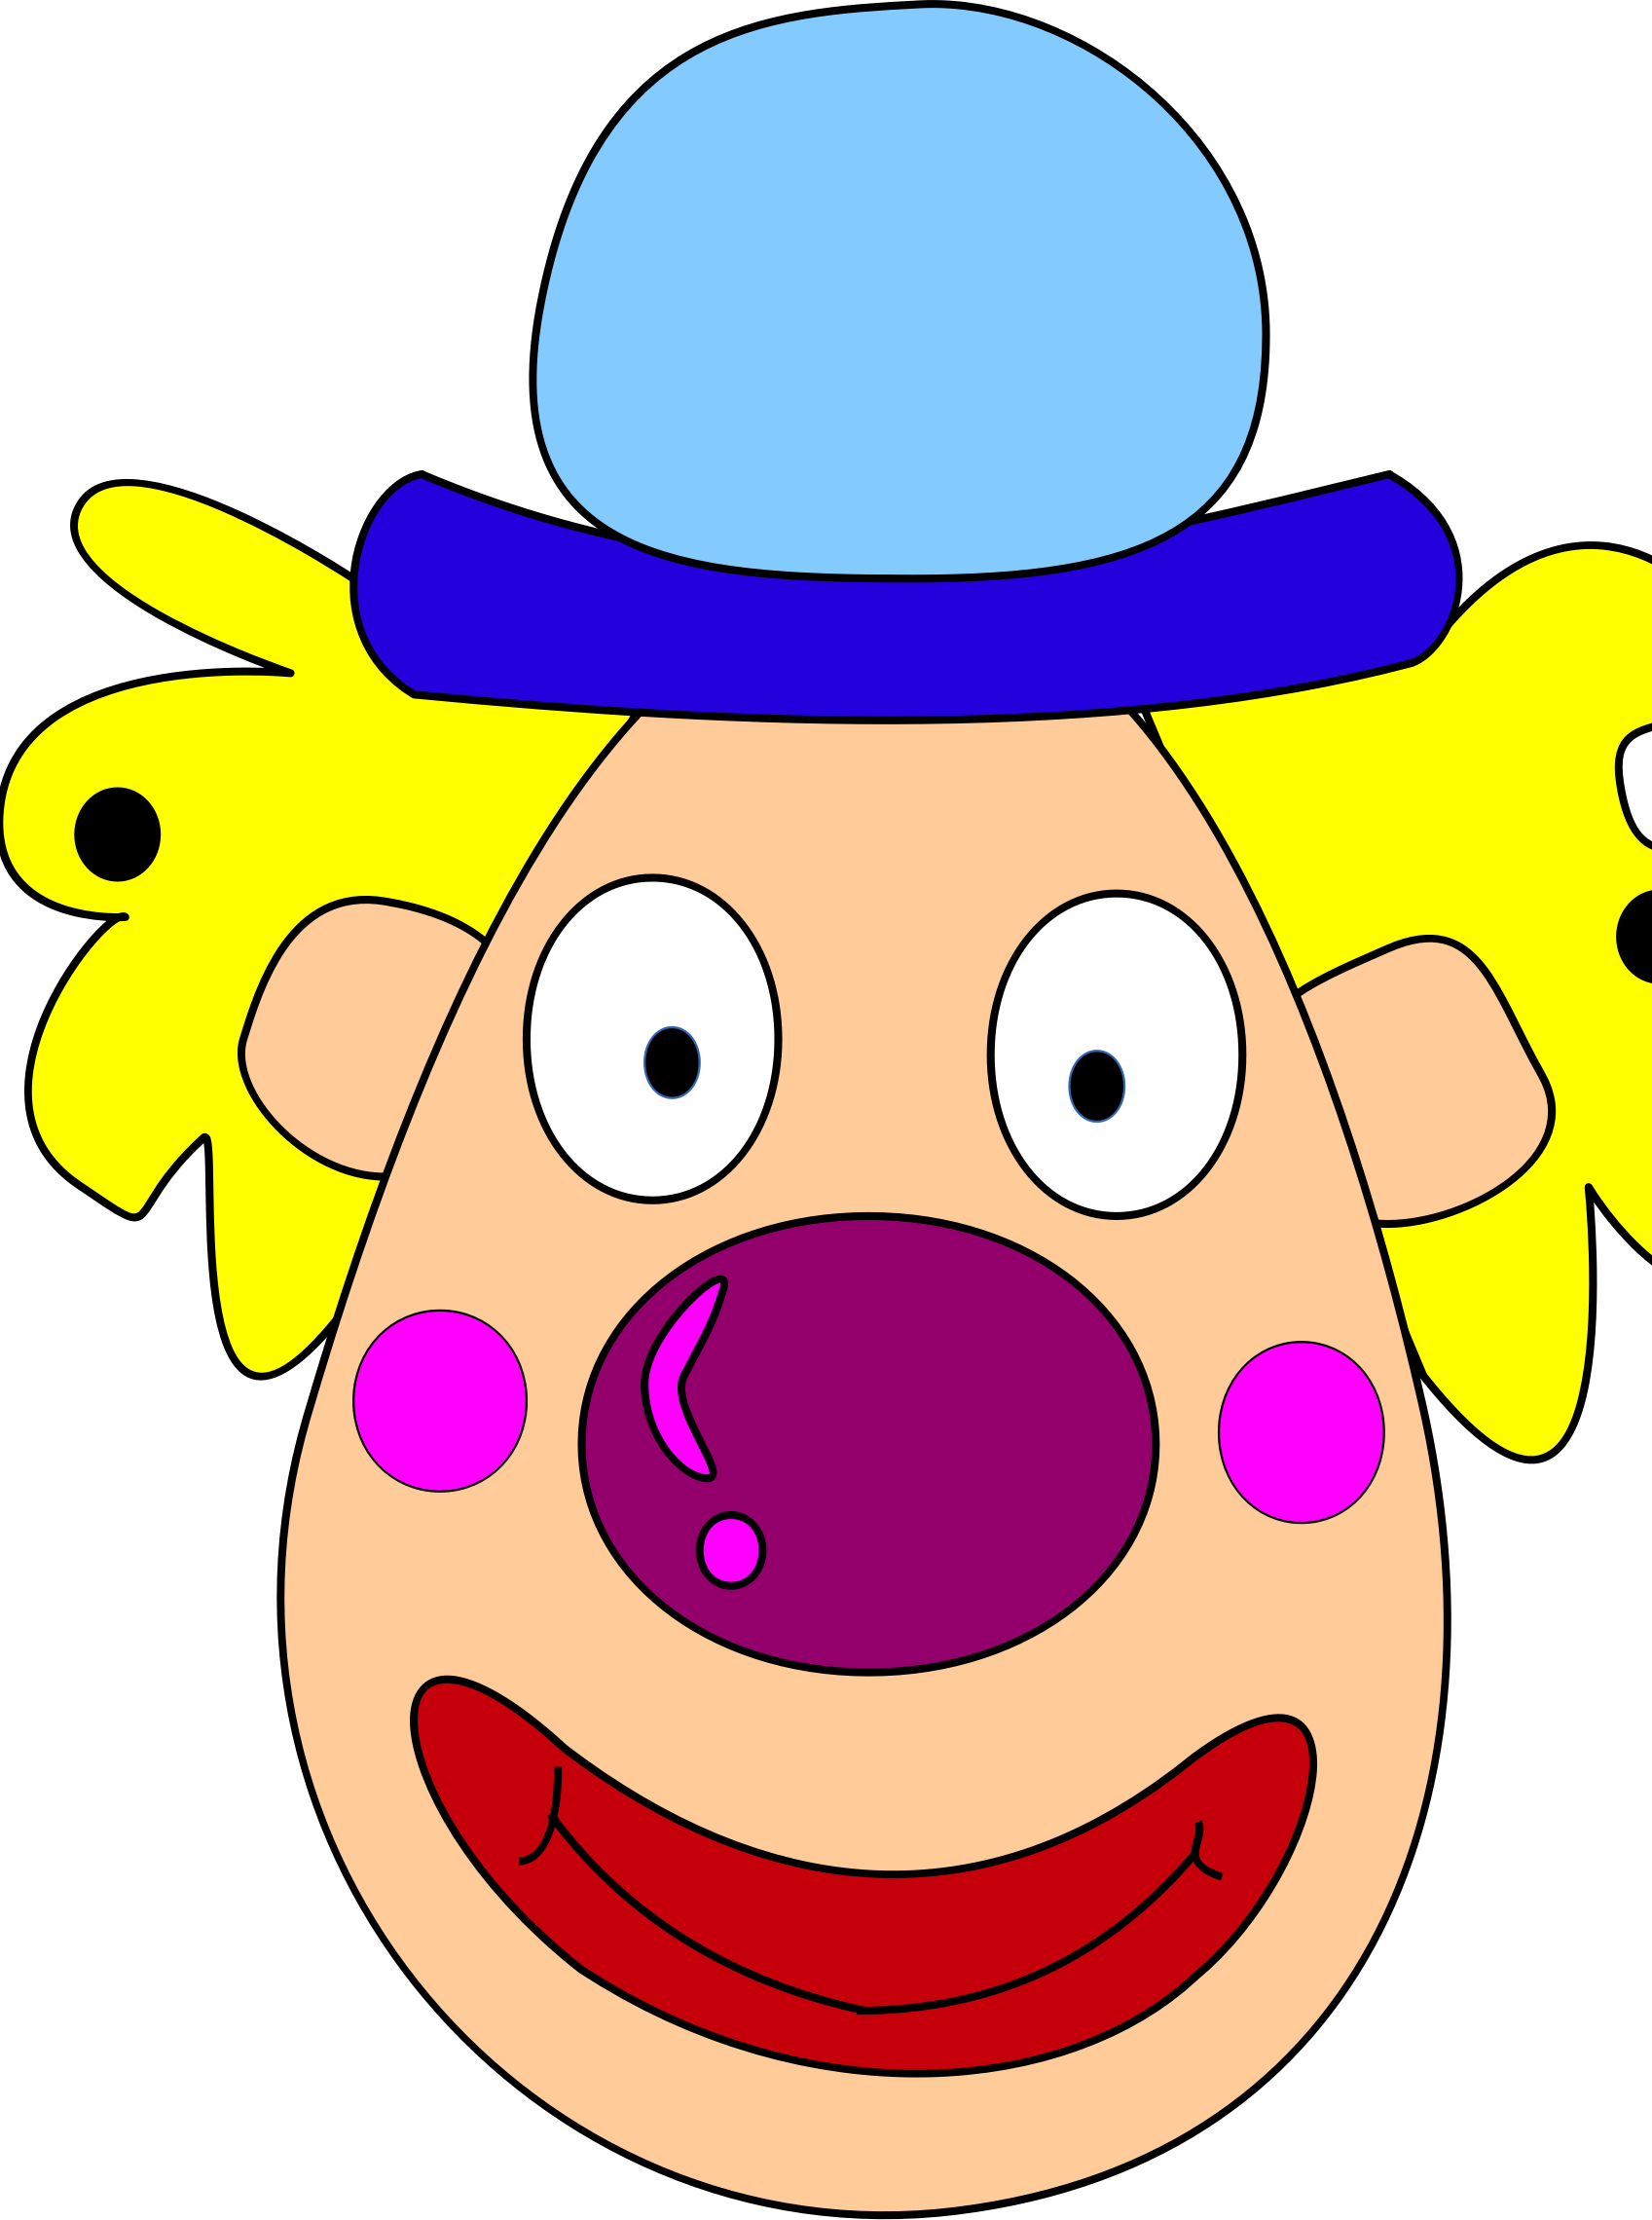 Clown clipart small, Clown small Transparent FREE for